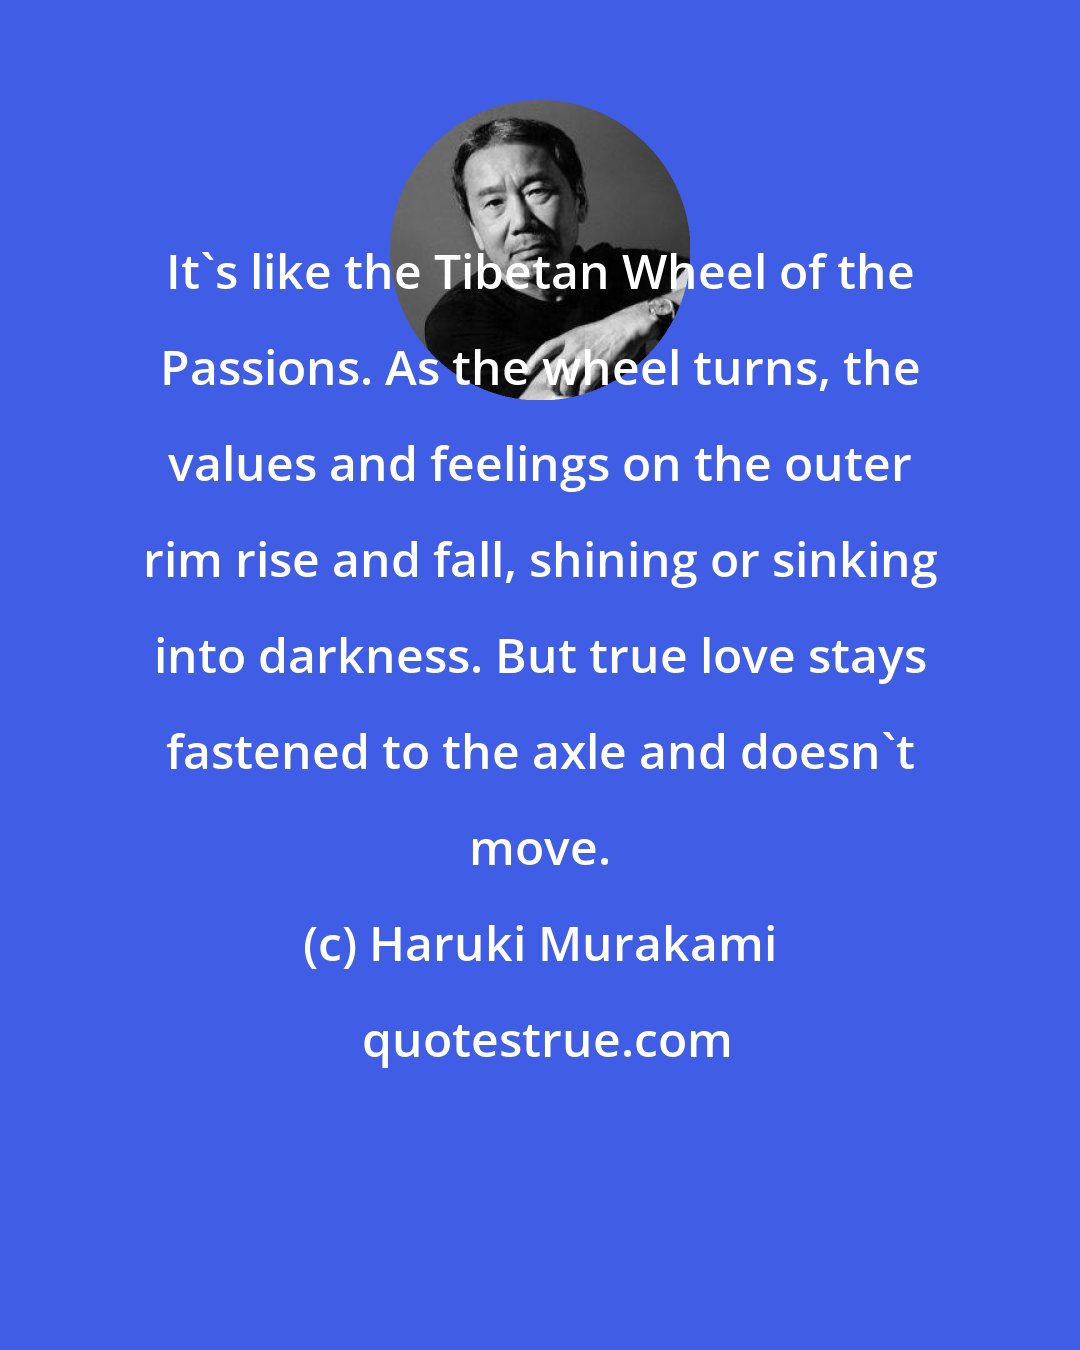 Haruki Murakami: It's like the Tibetan Wheel of the Passions. As the wheel turns, the values and feelings on the outer rim rise and fall, shining or sinking into darkness. But true love stays fastened to the axle and doesn't move.